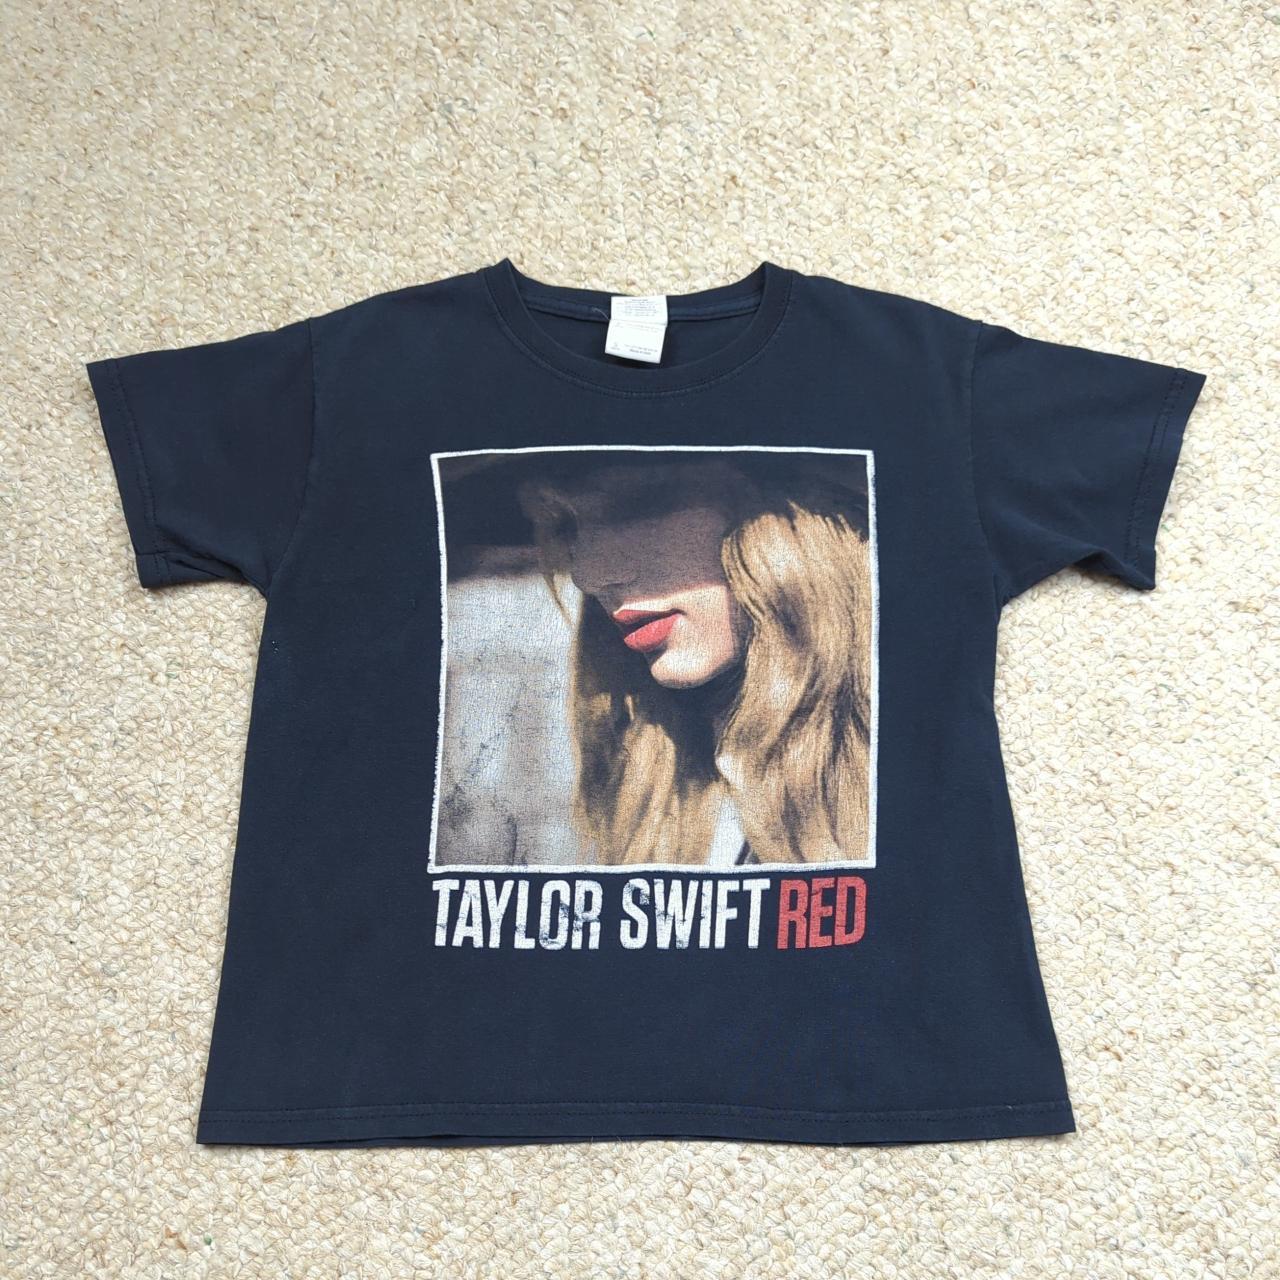 Taylor Swift Red Tour 2013 shirt Black Youth size... - Depop